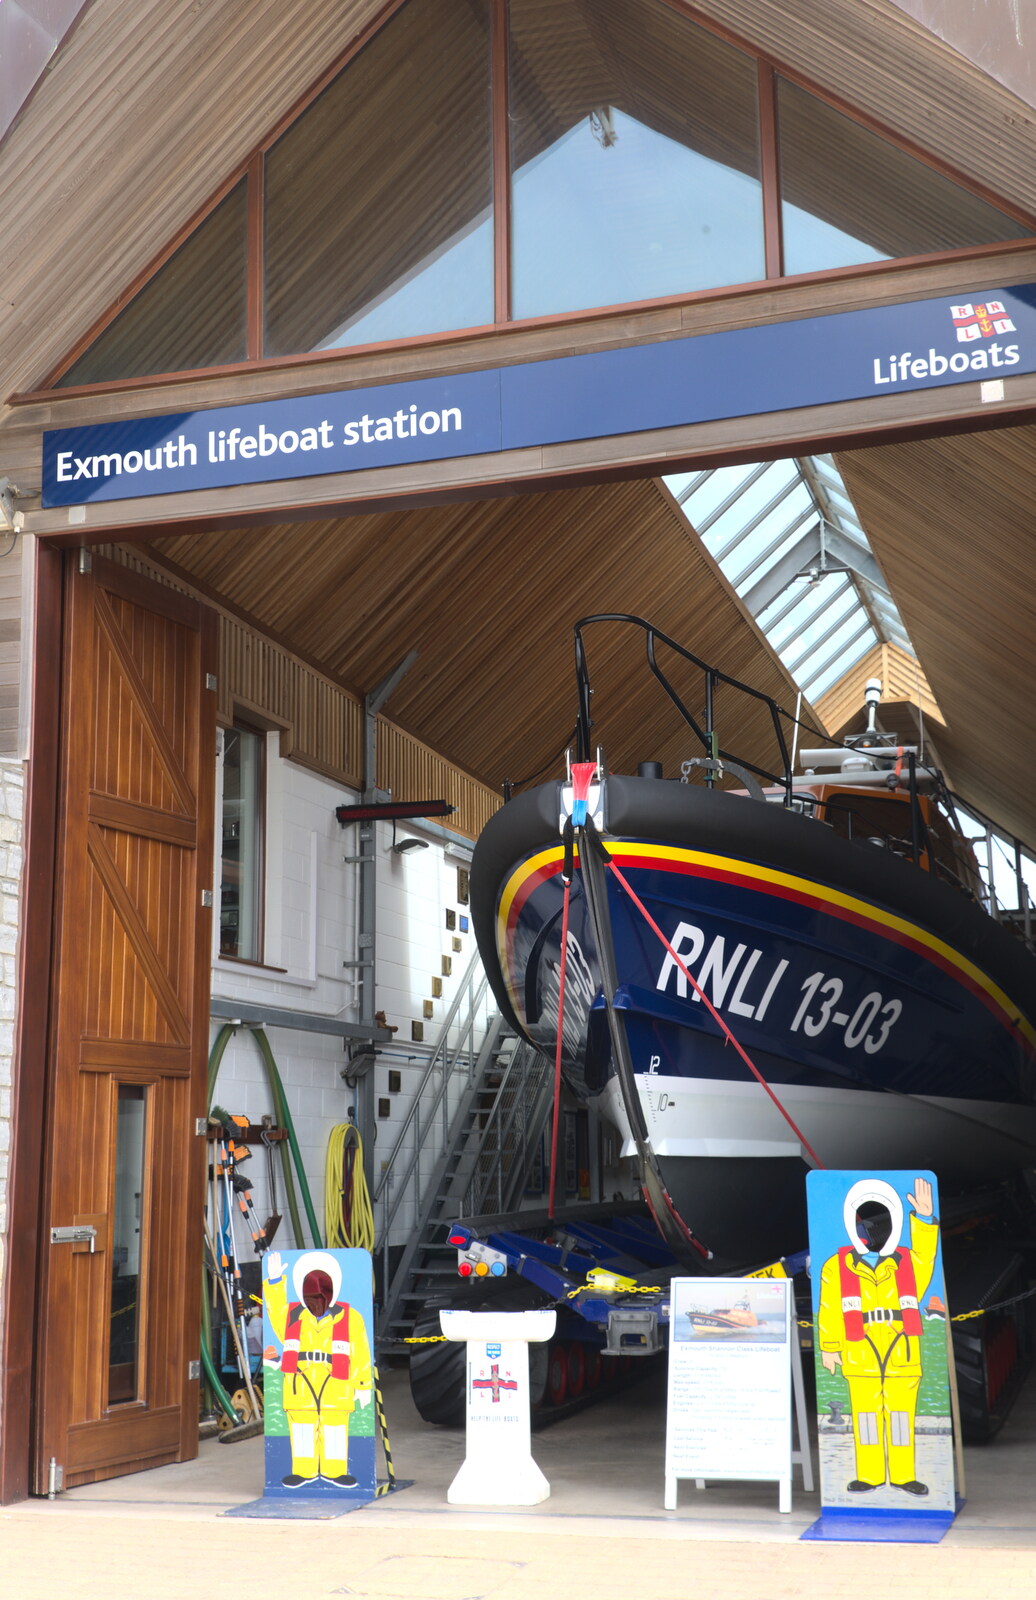 The Exmouth lifeboat from Grandma J's and a Day on the Beach, Spreyton and Exmouth, Devon - 13th April 2017